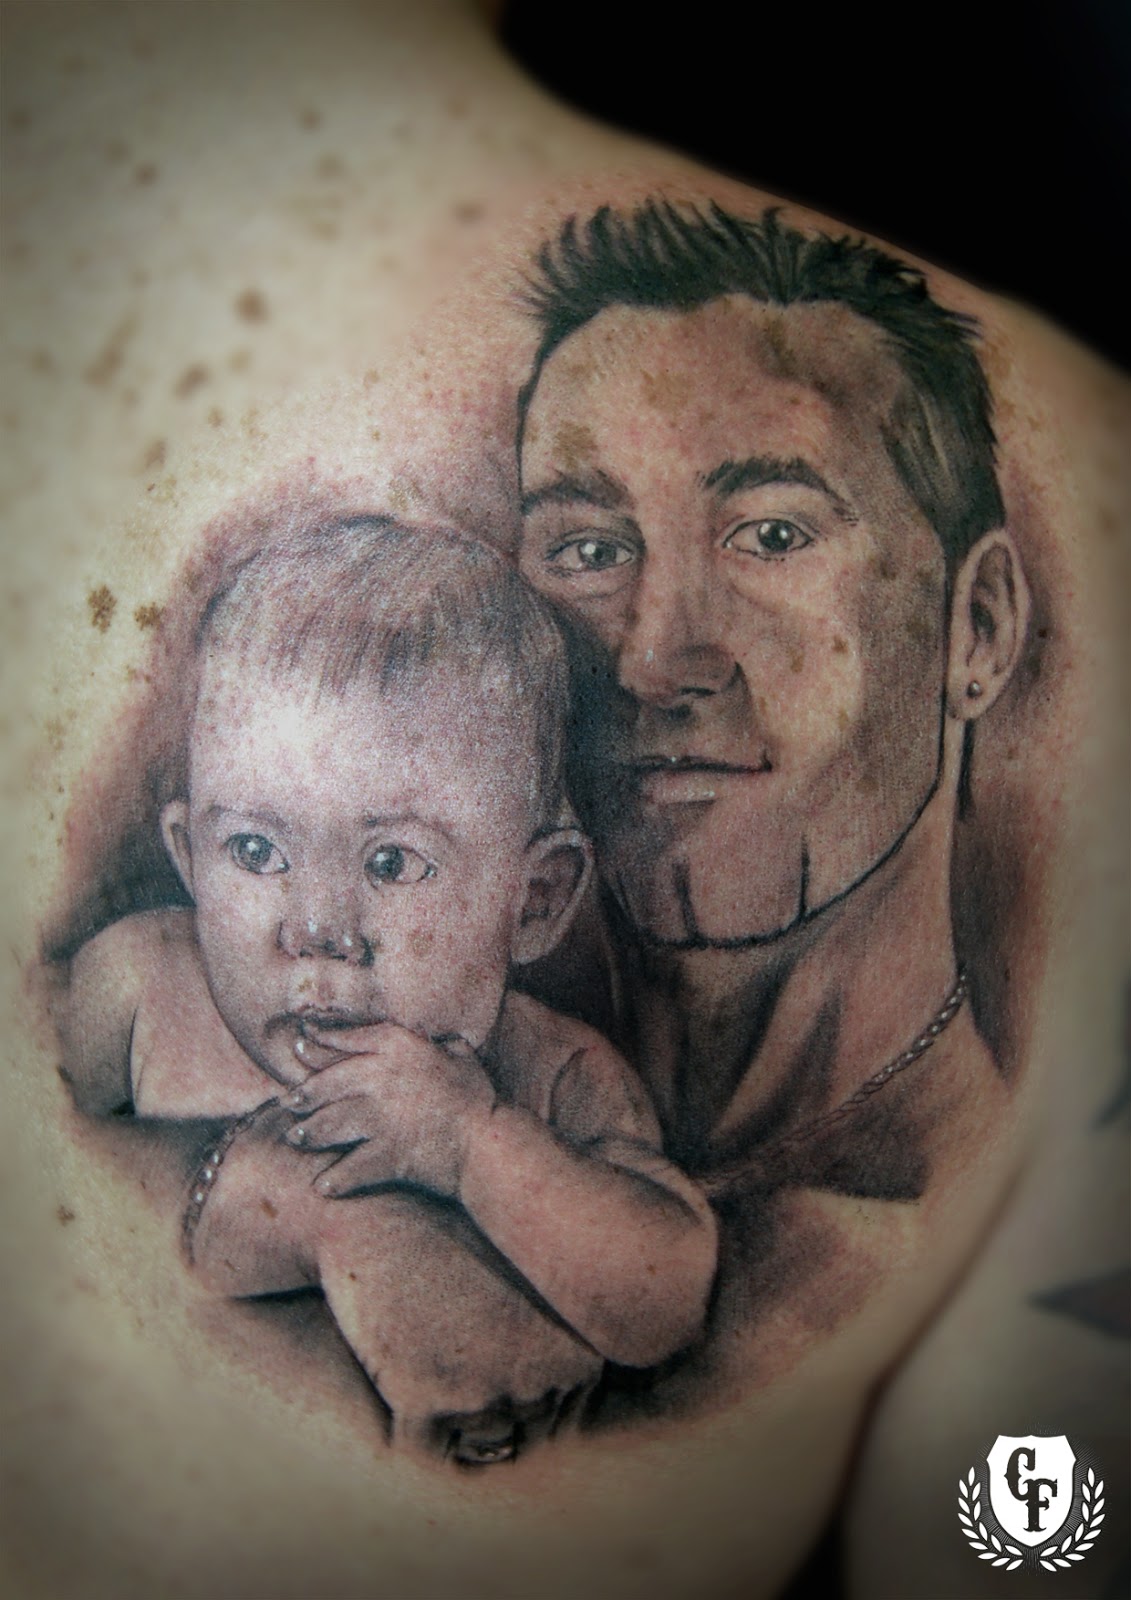 The Meaning Behind Simple Father-Son Tattoos